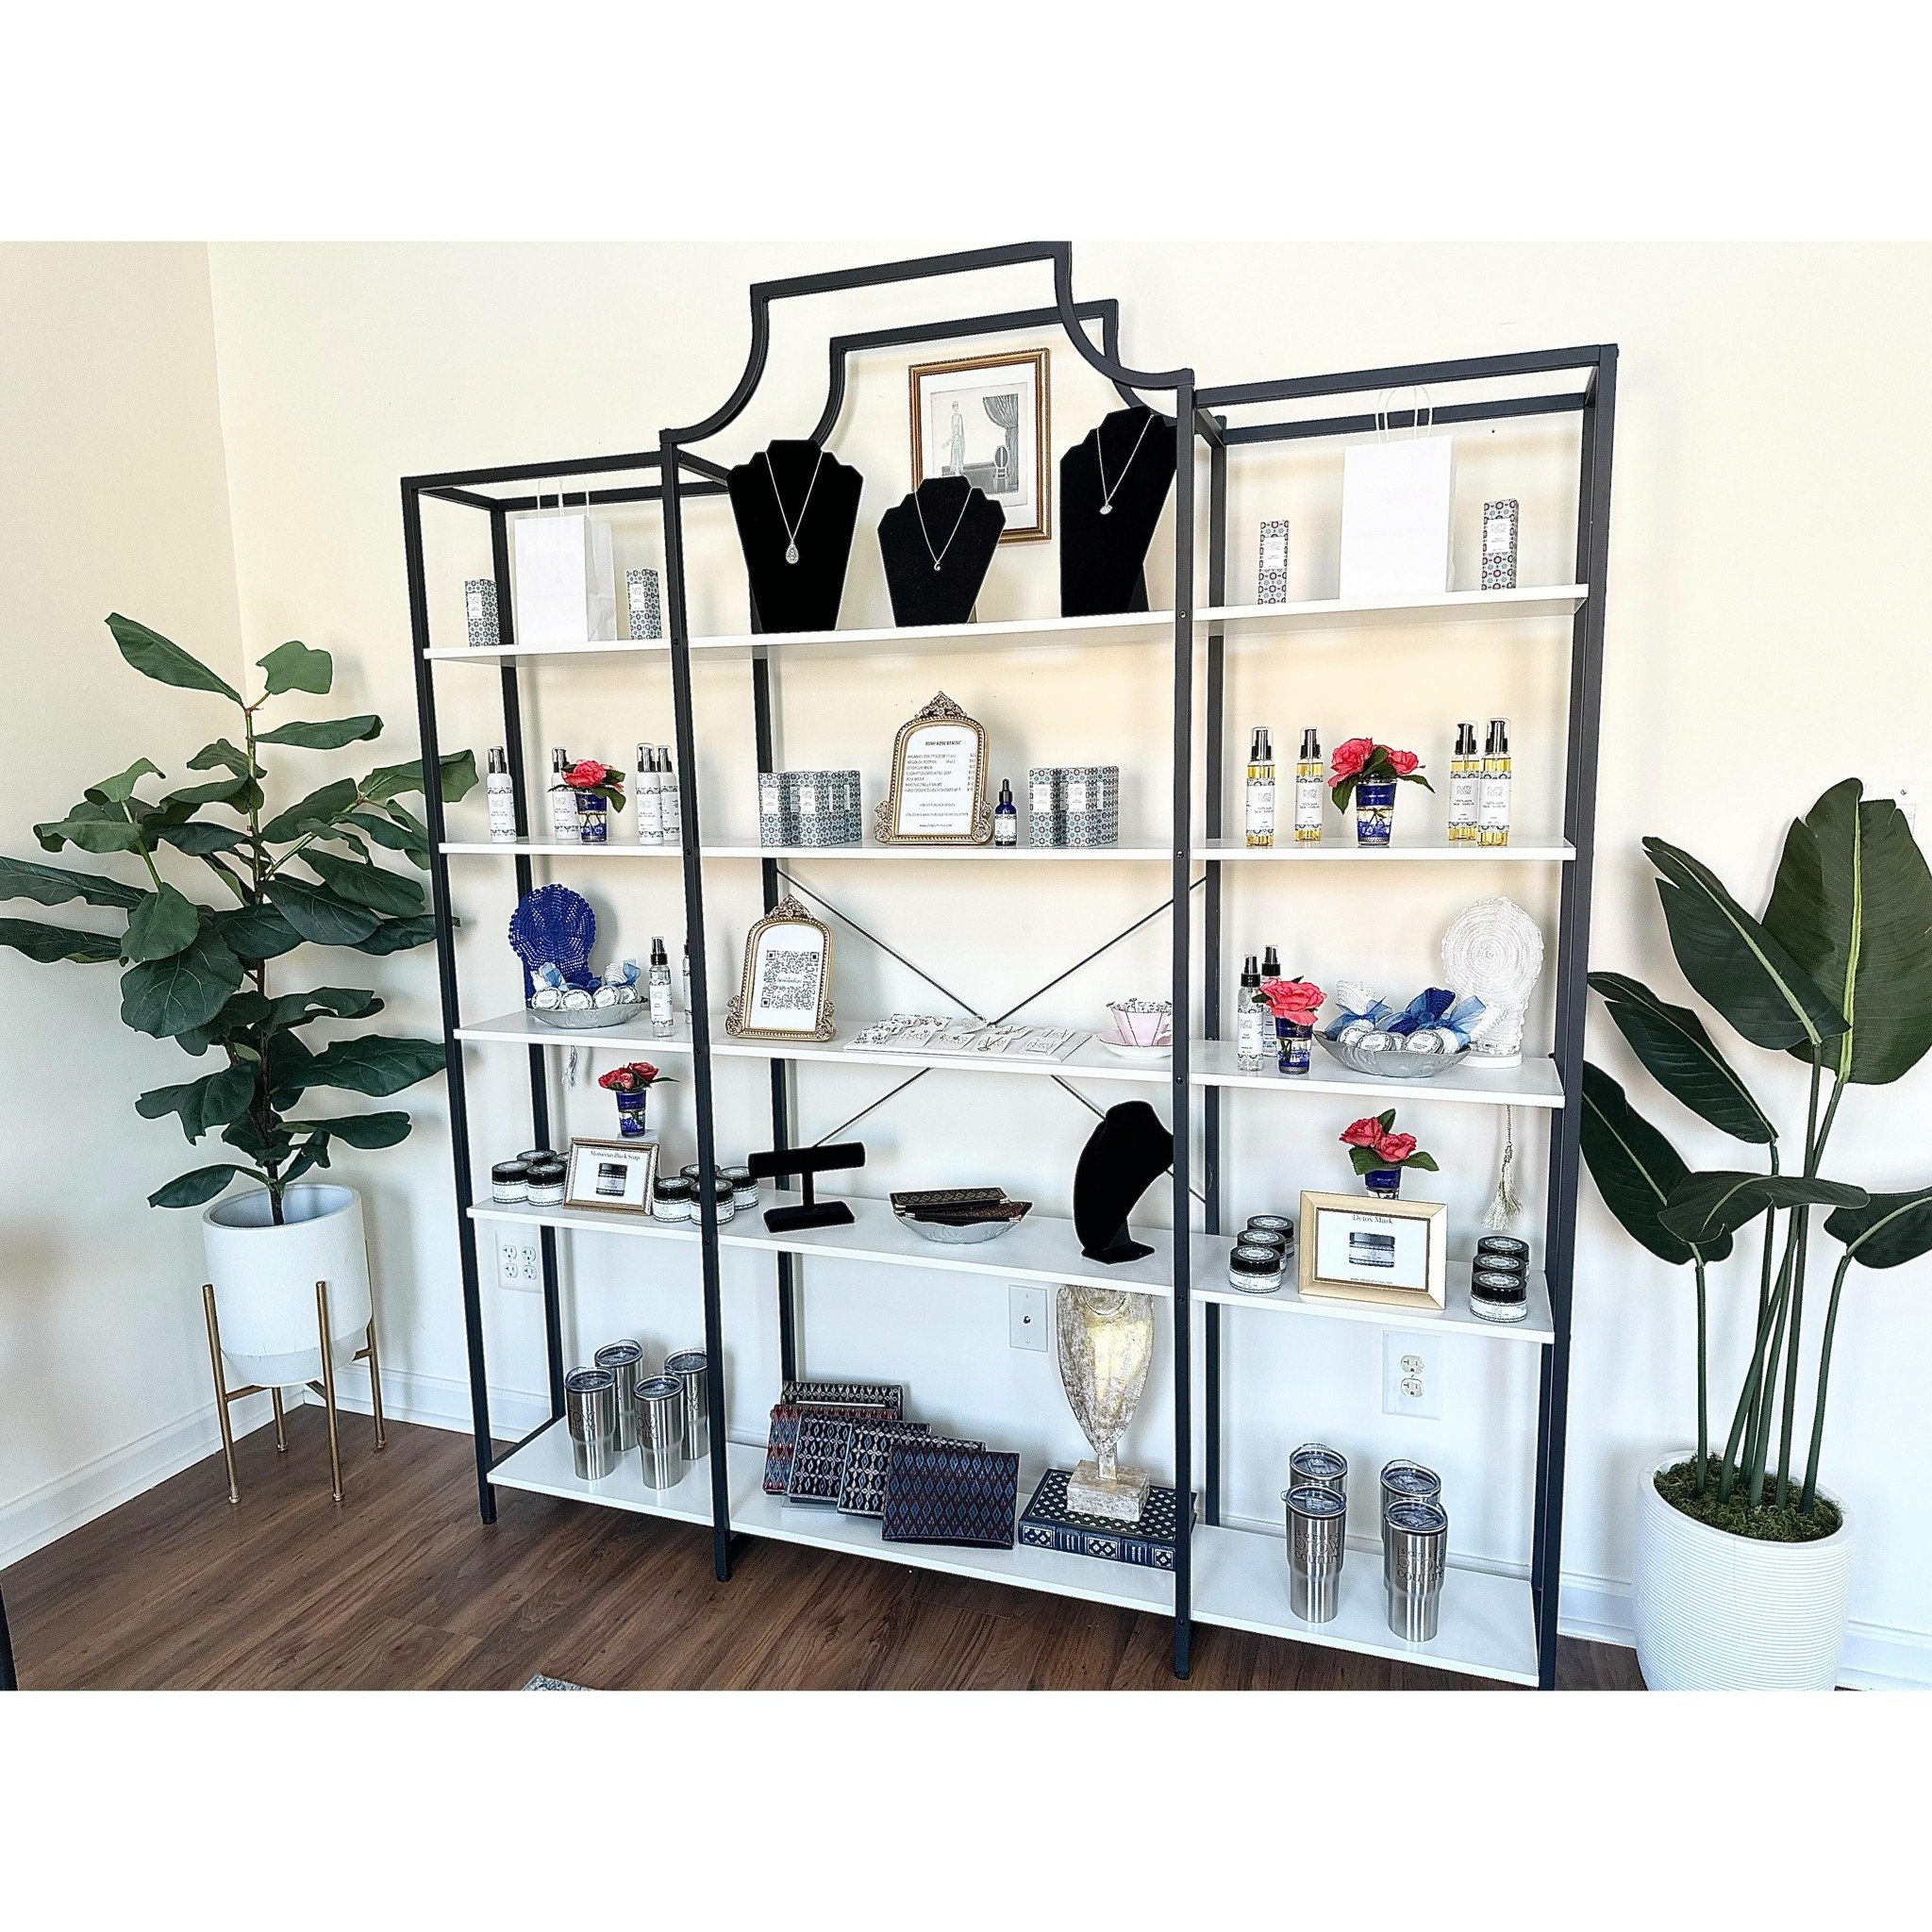 New retail display in Samira Brow Couture&rsquo;s beautique. I&rsquo;ll be announcing a few EXCITING things for May + June. Stay tuned!! @samirabrowcouture 

#samirabrowcouture